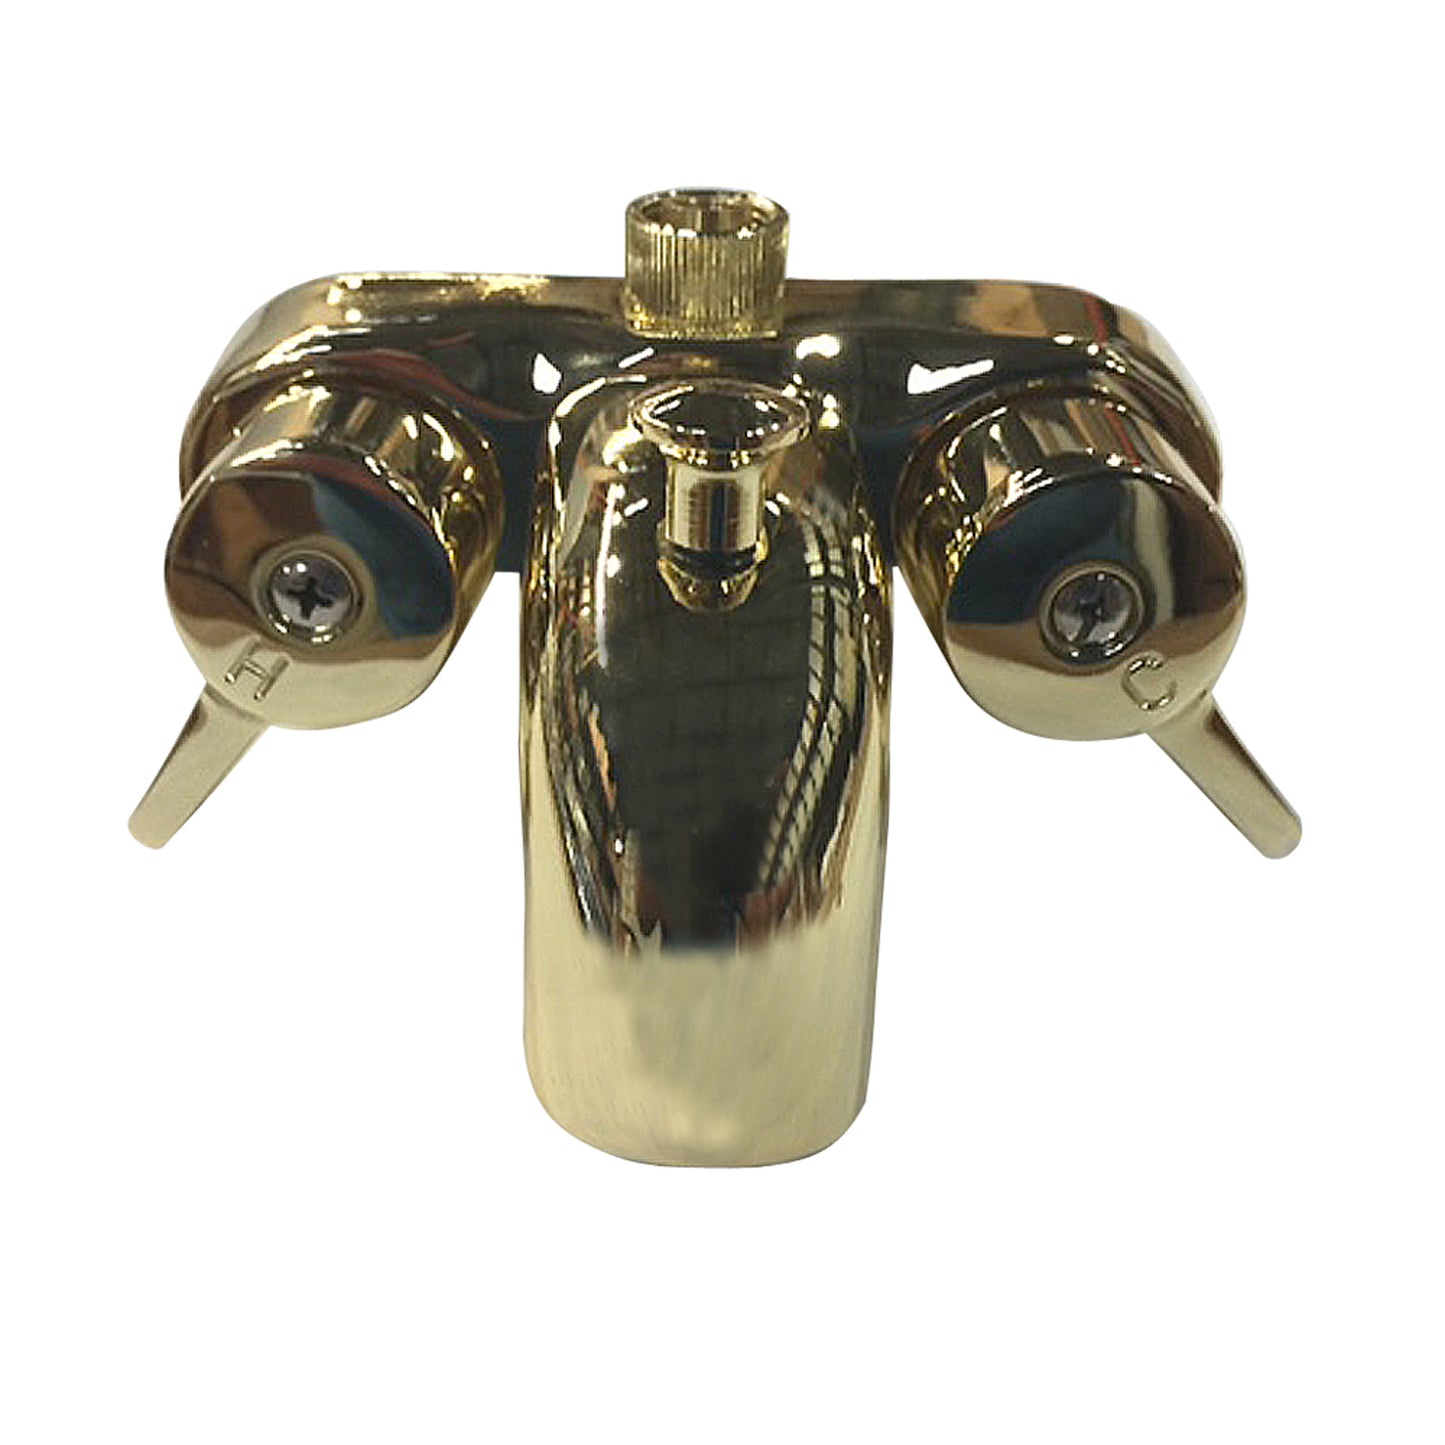 Tub Wall Mount Diverter Bathcock in Polished Brass